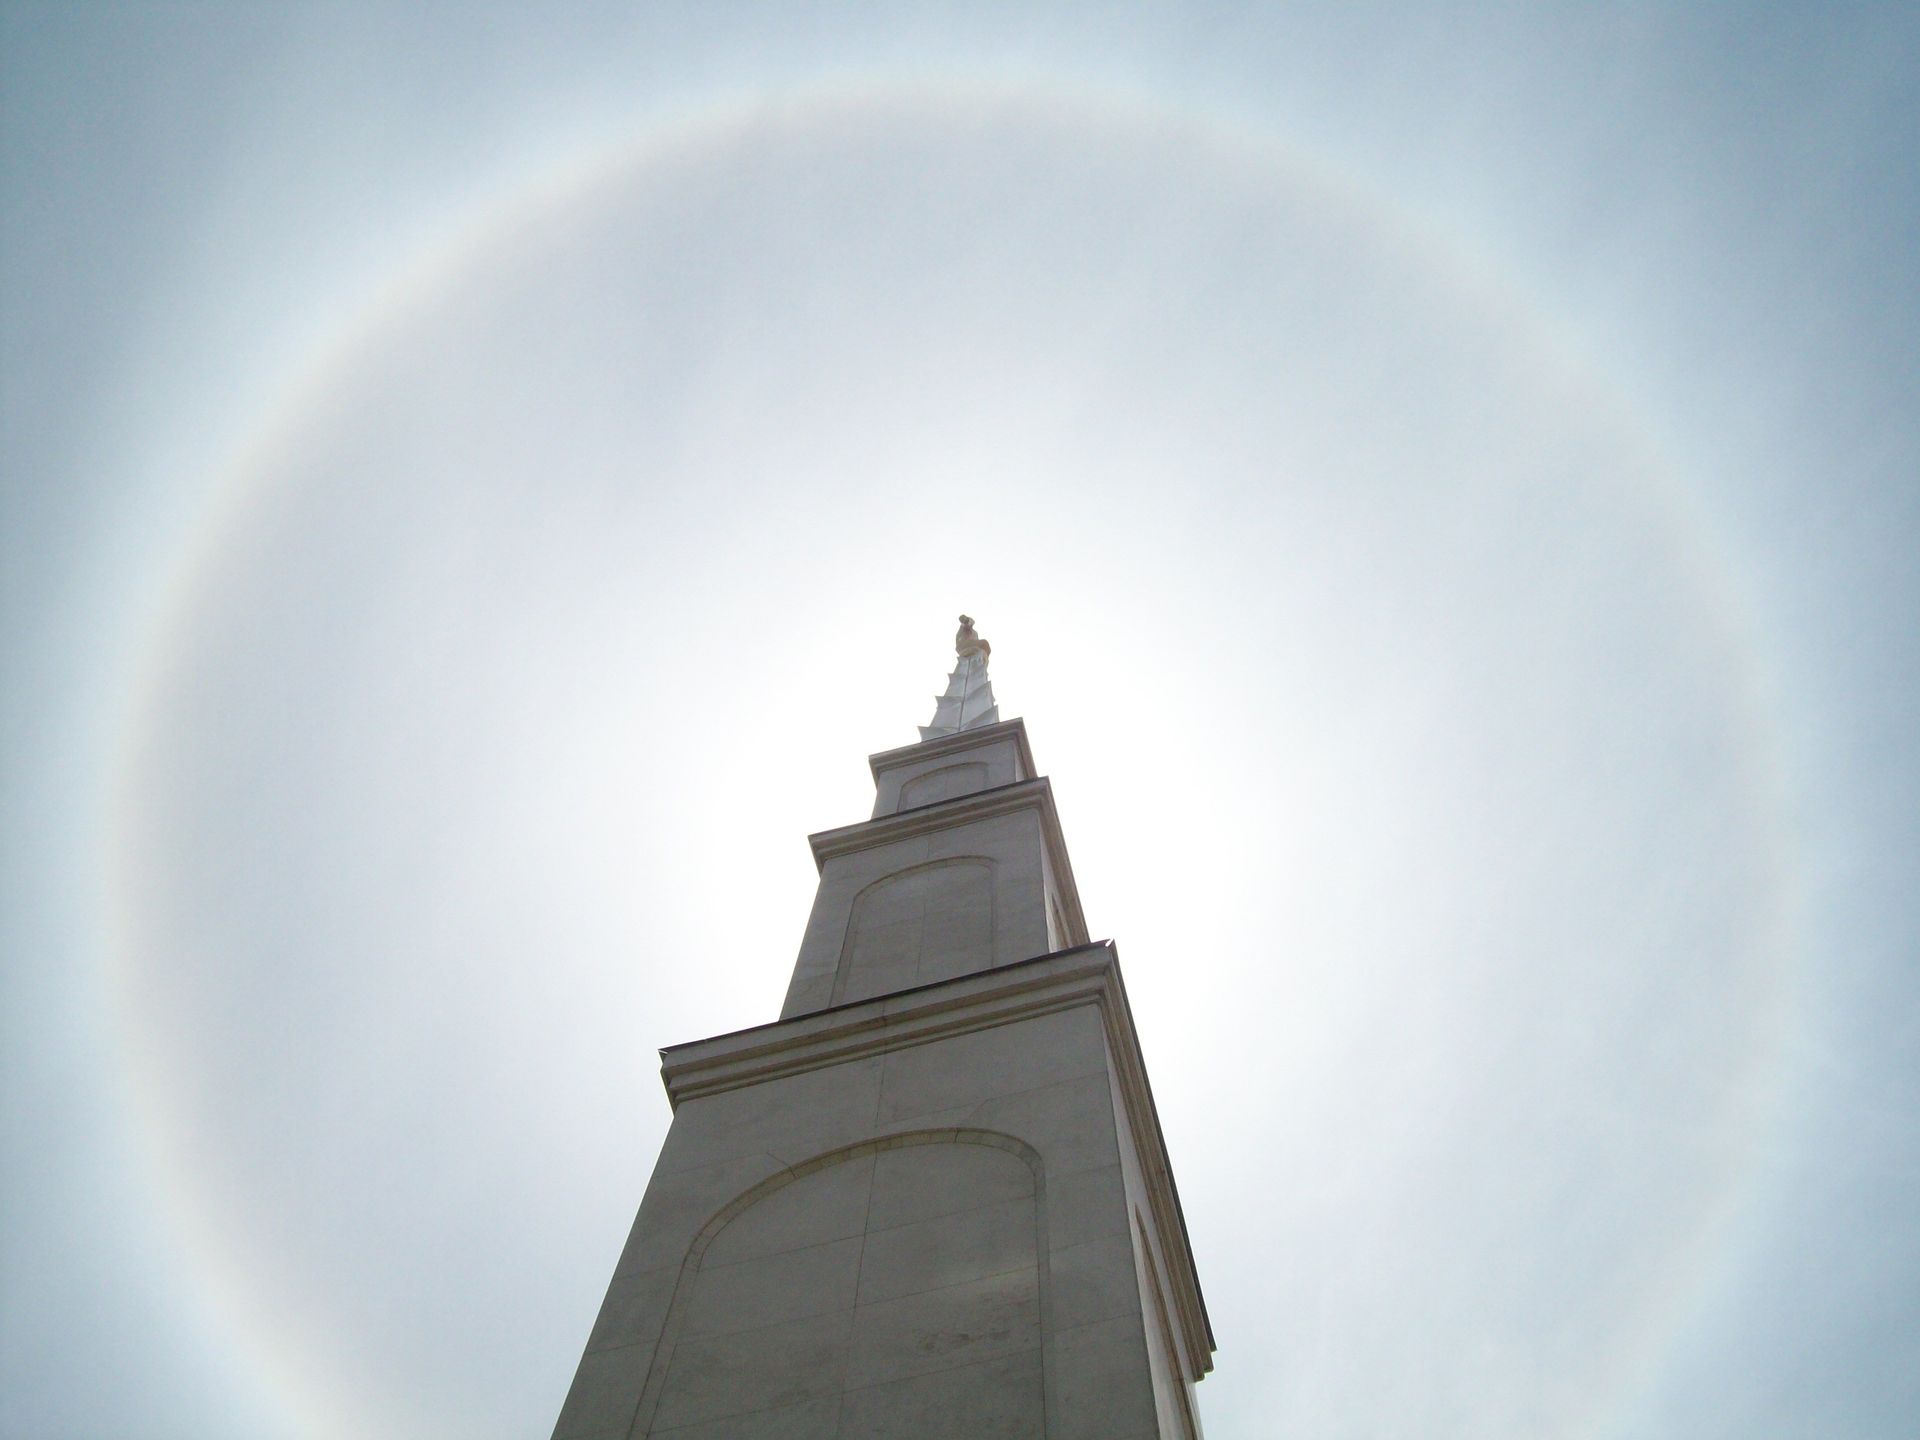 A spire of the Lima Peru Temple in sunshine.